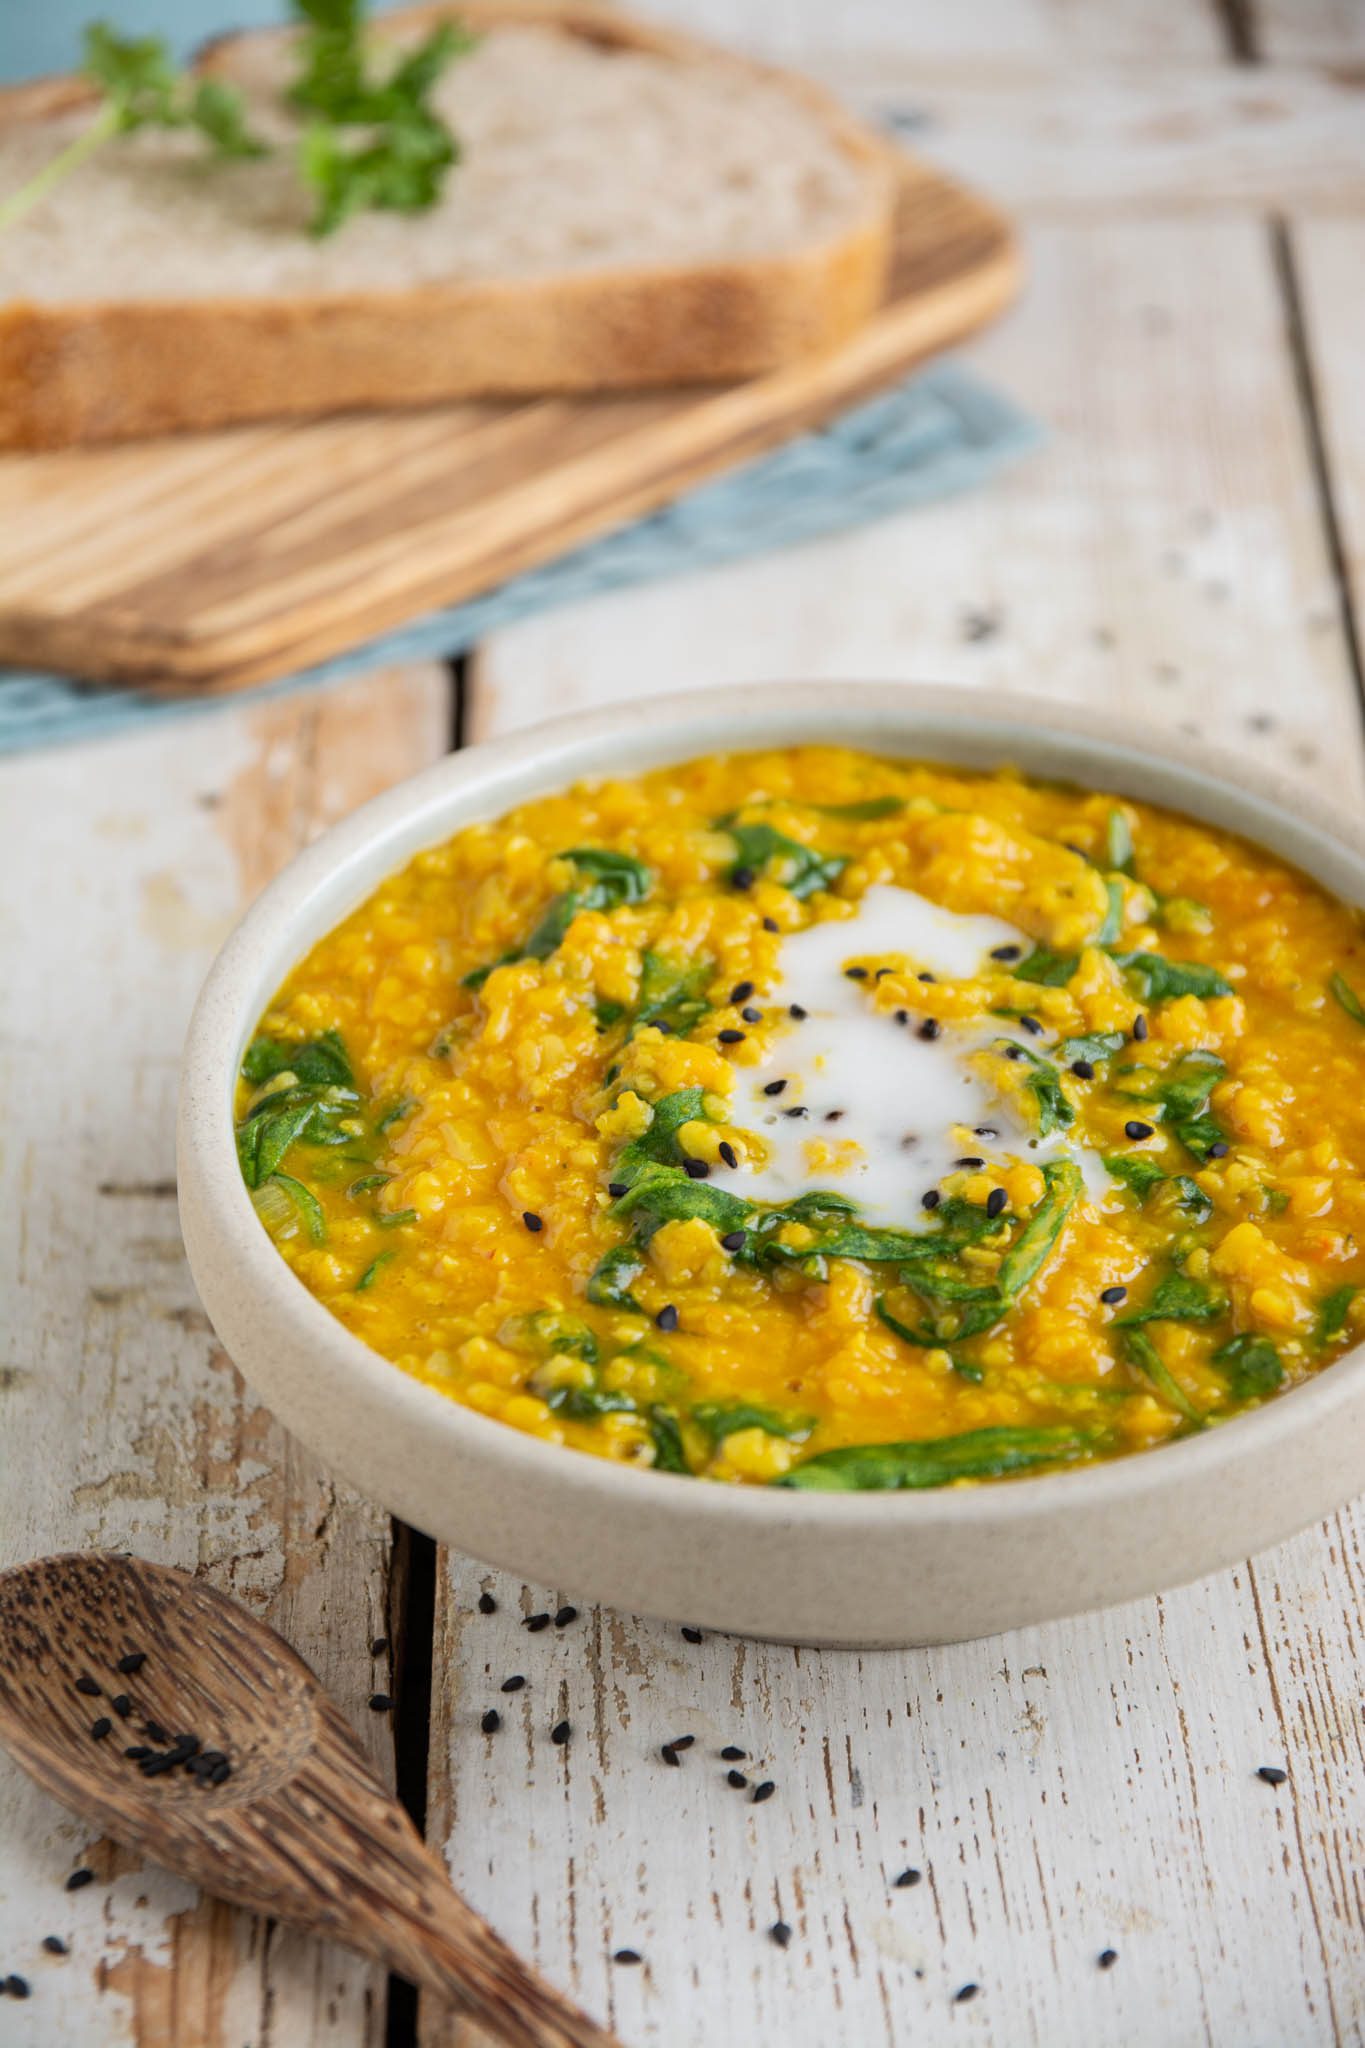 Learn how to make an easy red lentil and moong dal recipe with pumpkin and spinach. You’ll need simple plant-based ingredients and 30 minutes of your time.